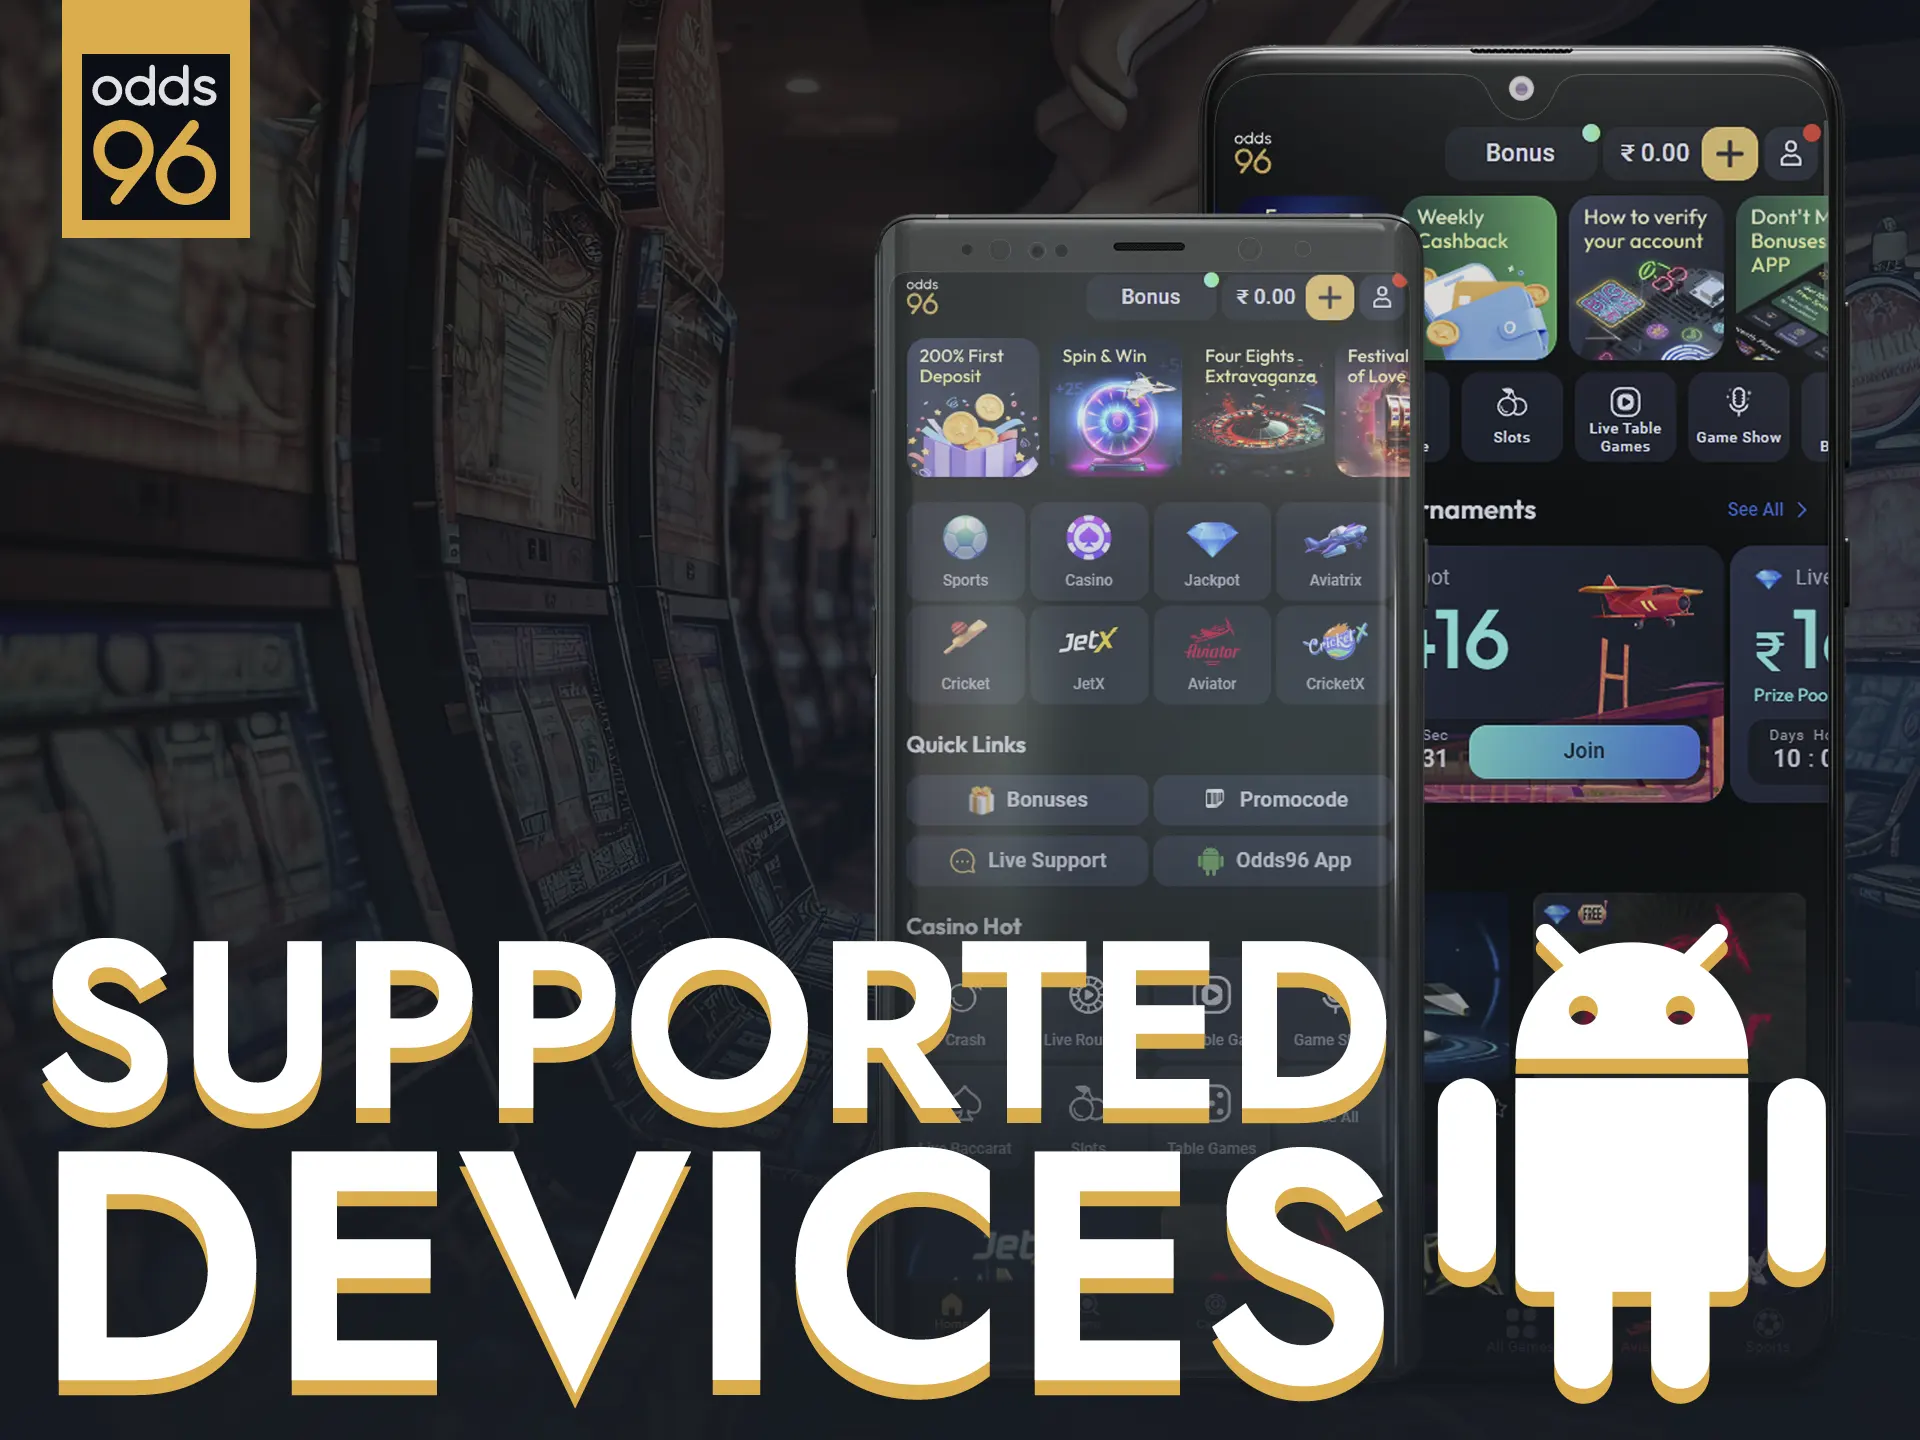 The Odds96 app is compatible with various Android models.